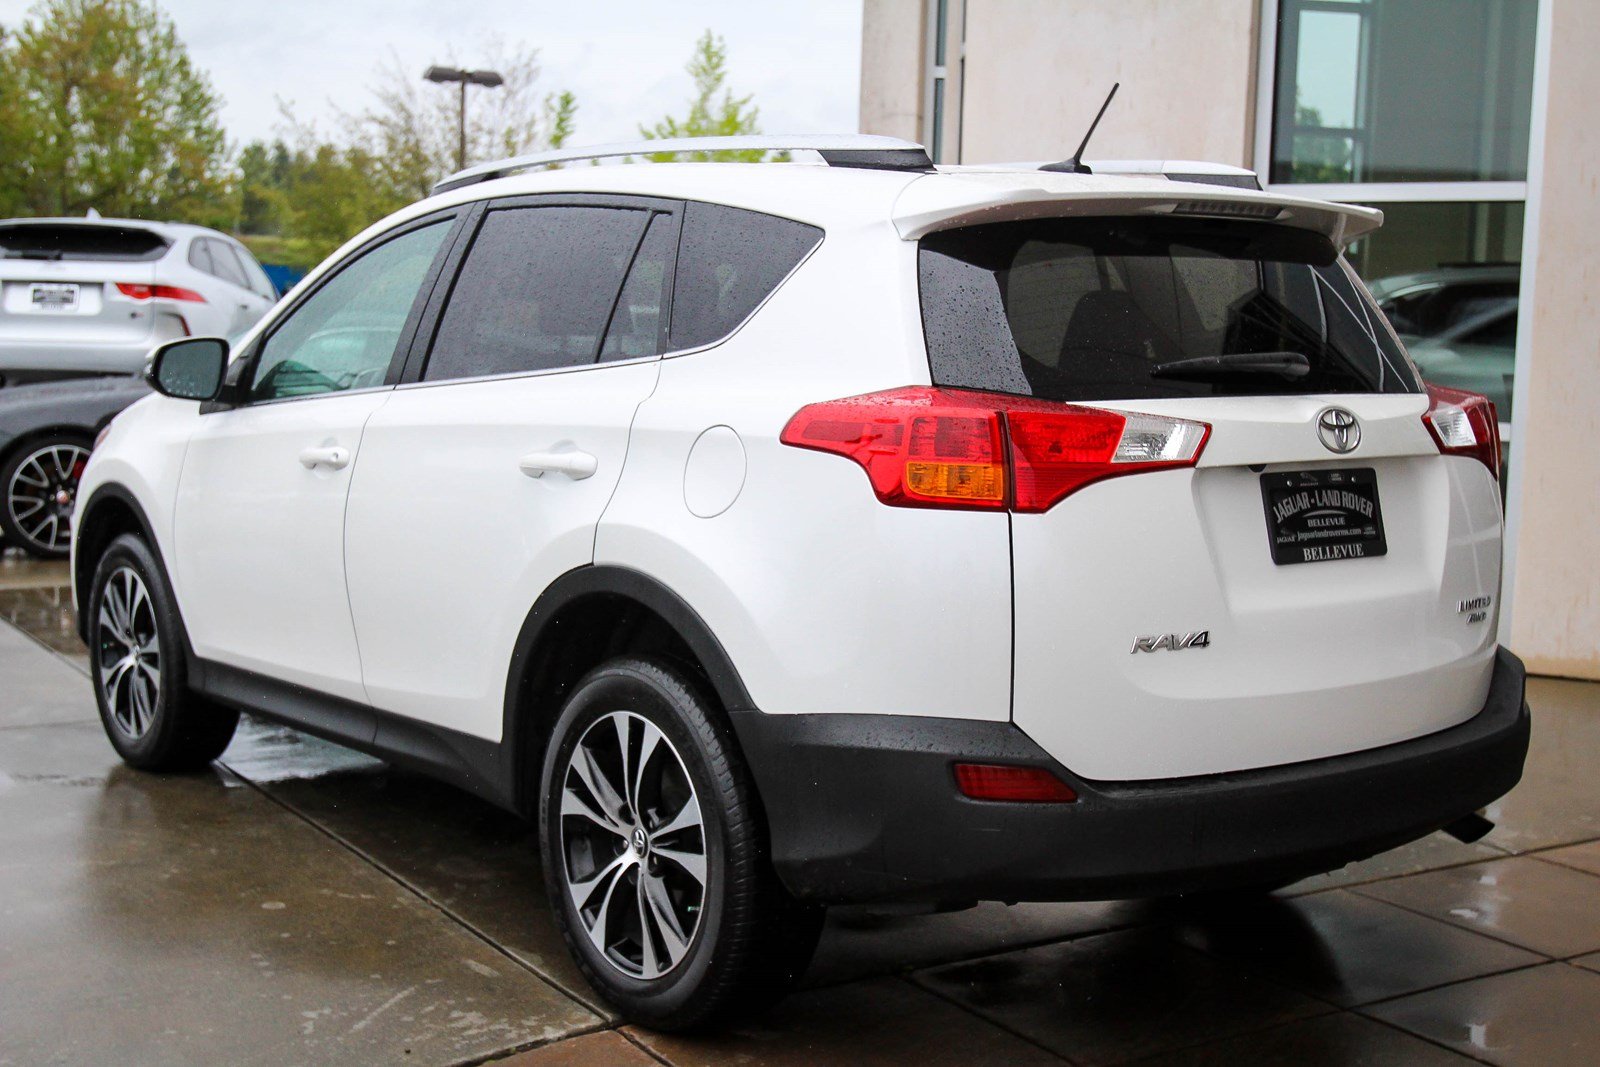 Pre-Owned 2015 Toyota RAV4 Limited Sport Utility in Bellevue #74898A